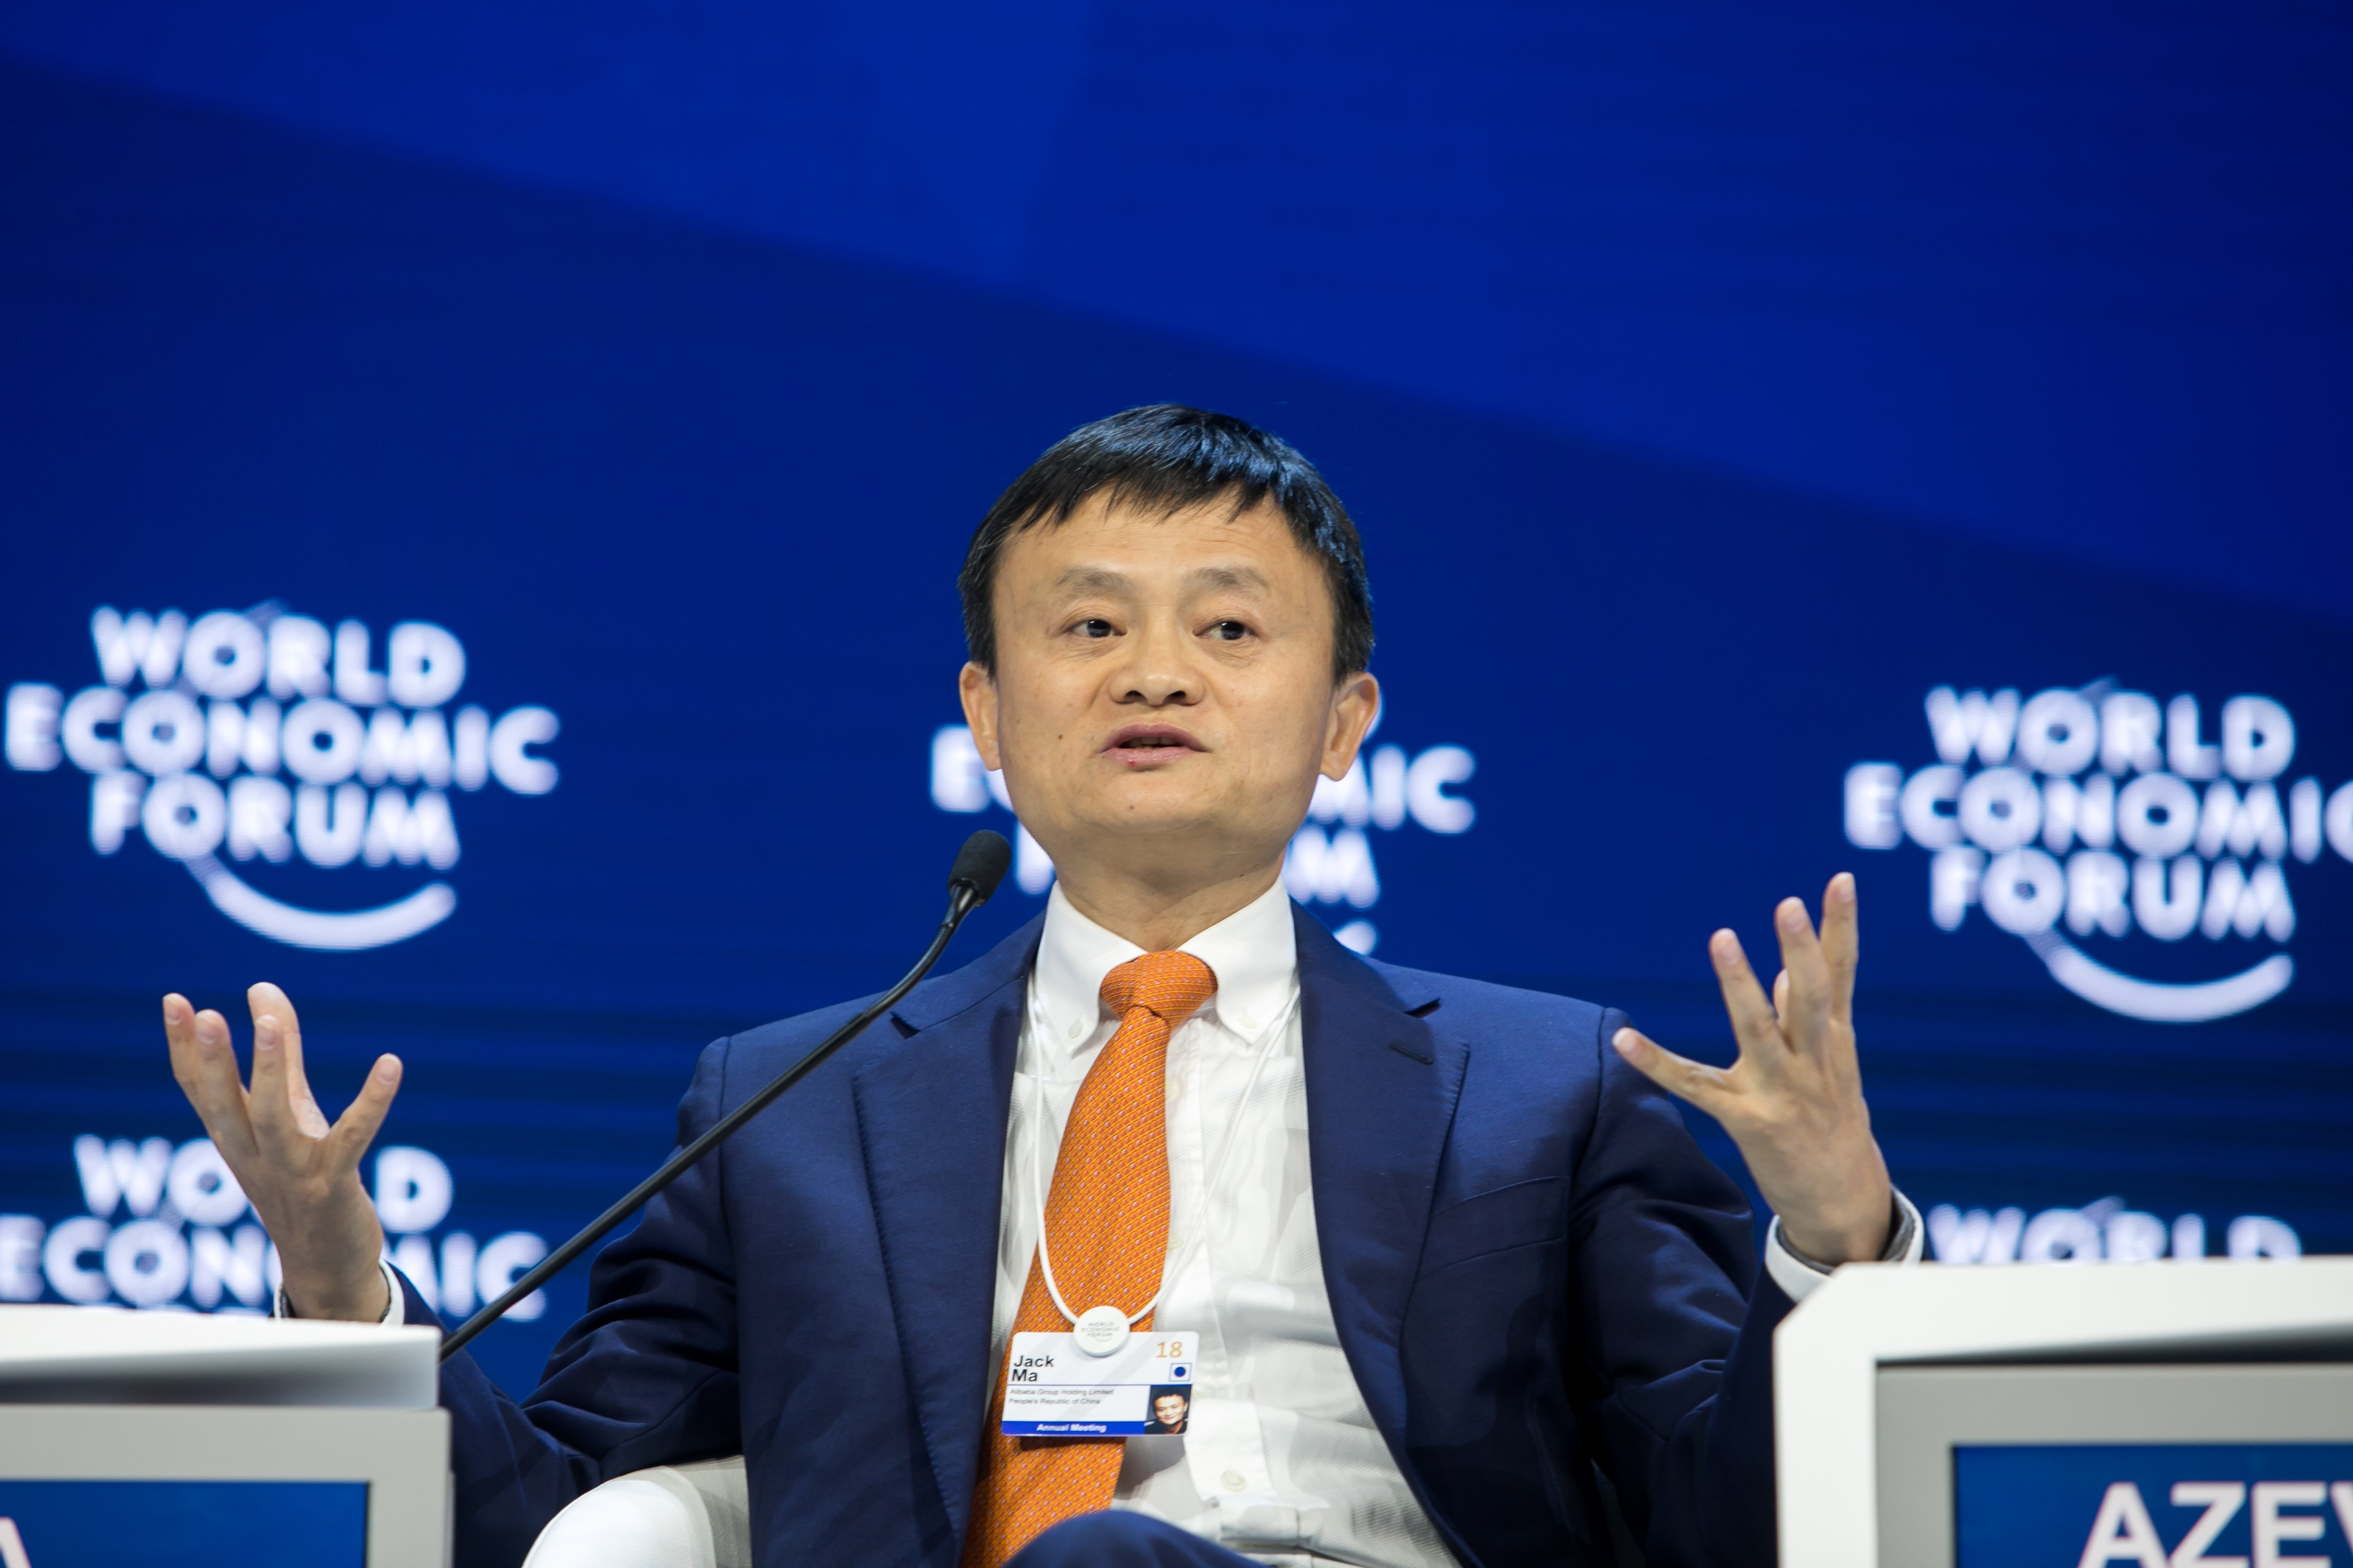 Alibaba's Jack Ma Remains Amongst China's Top 5 Richest Despite Being Away From Business